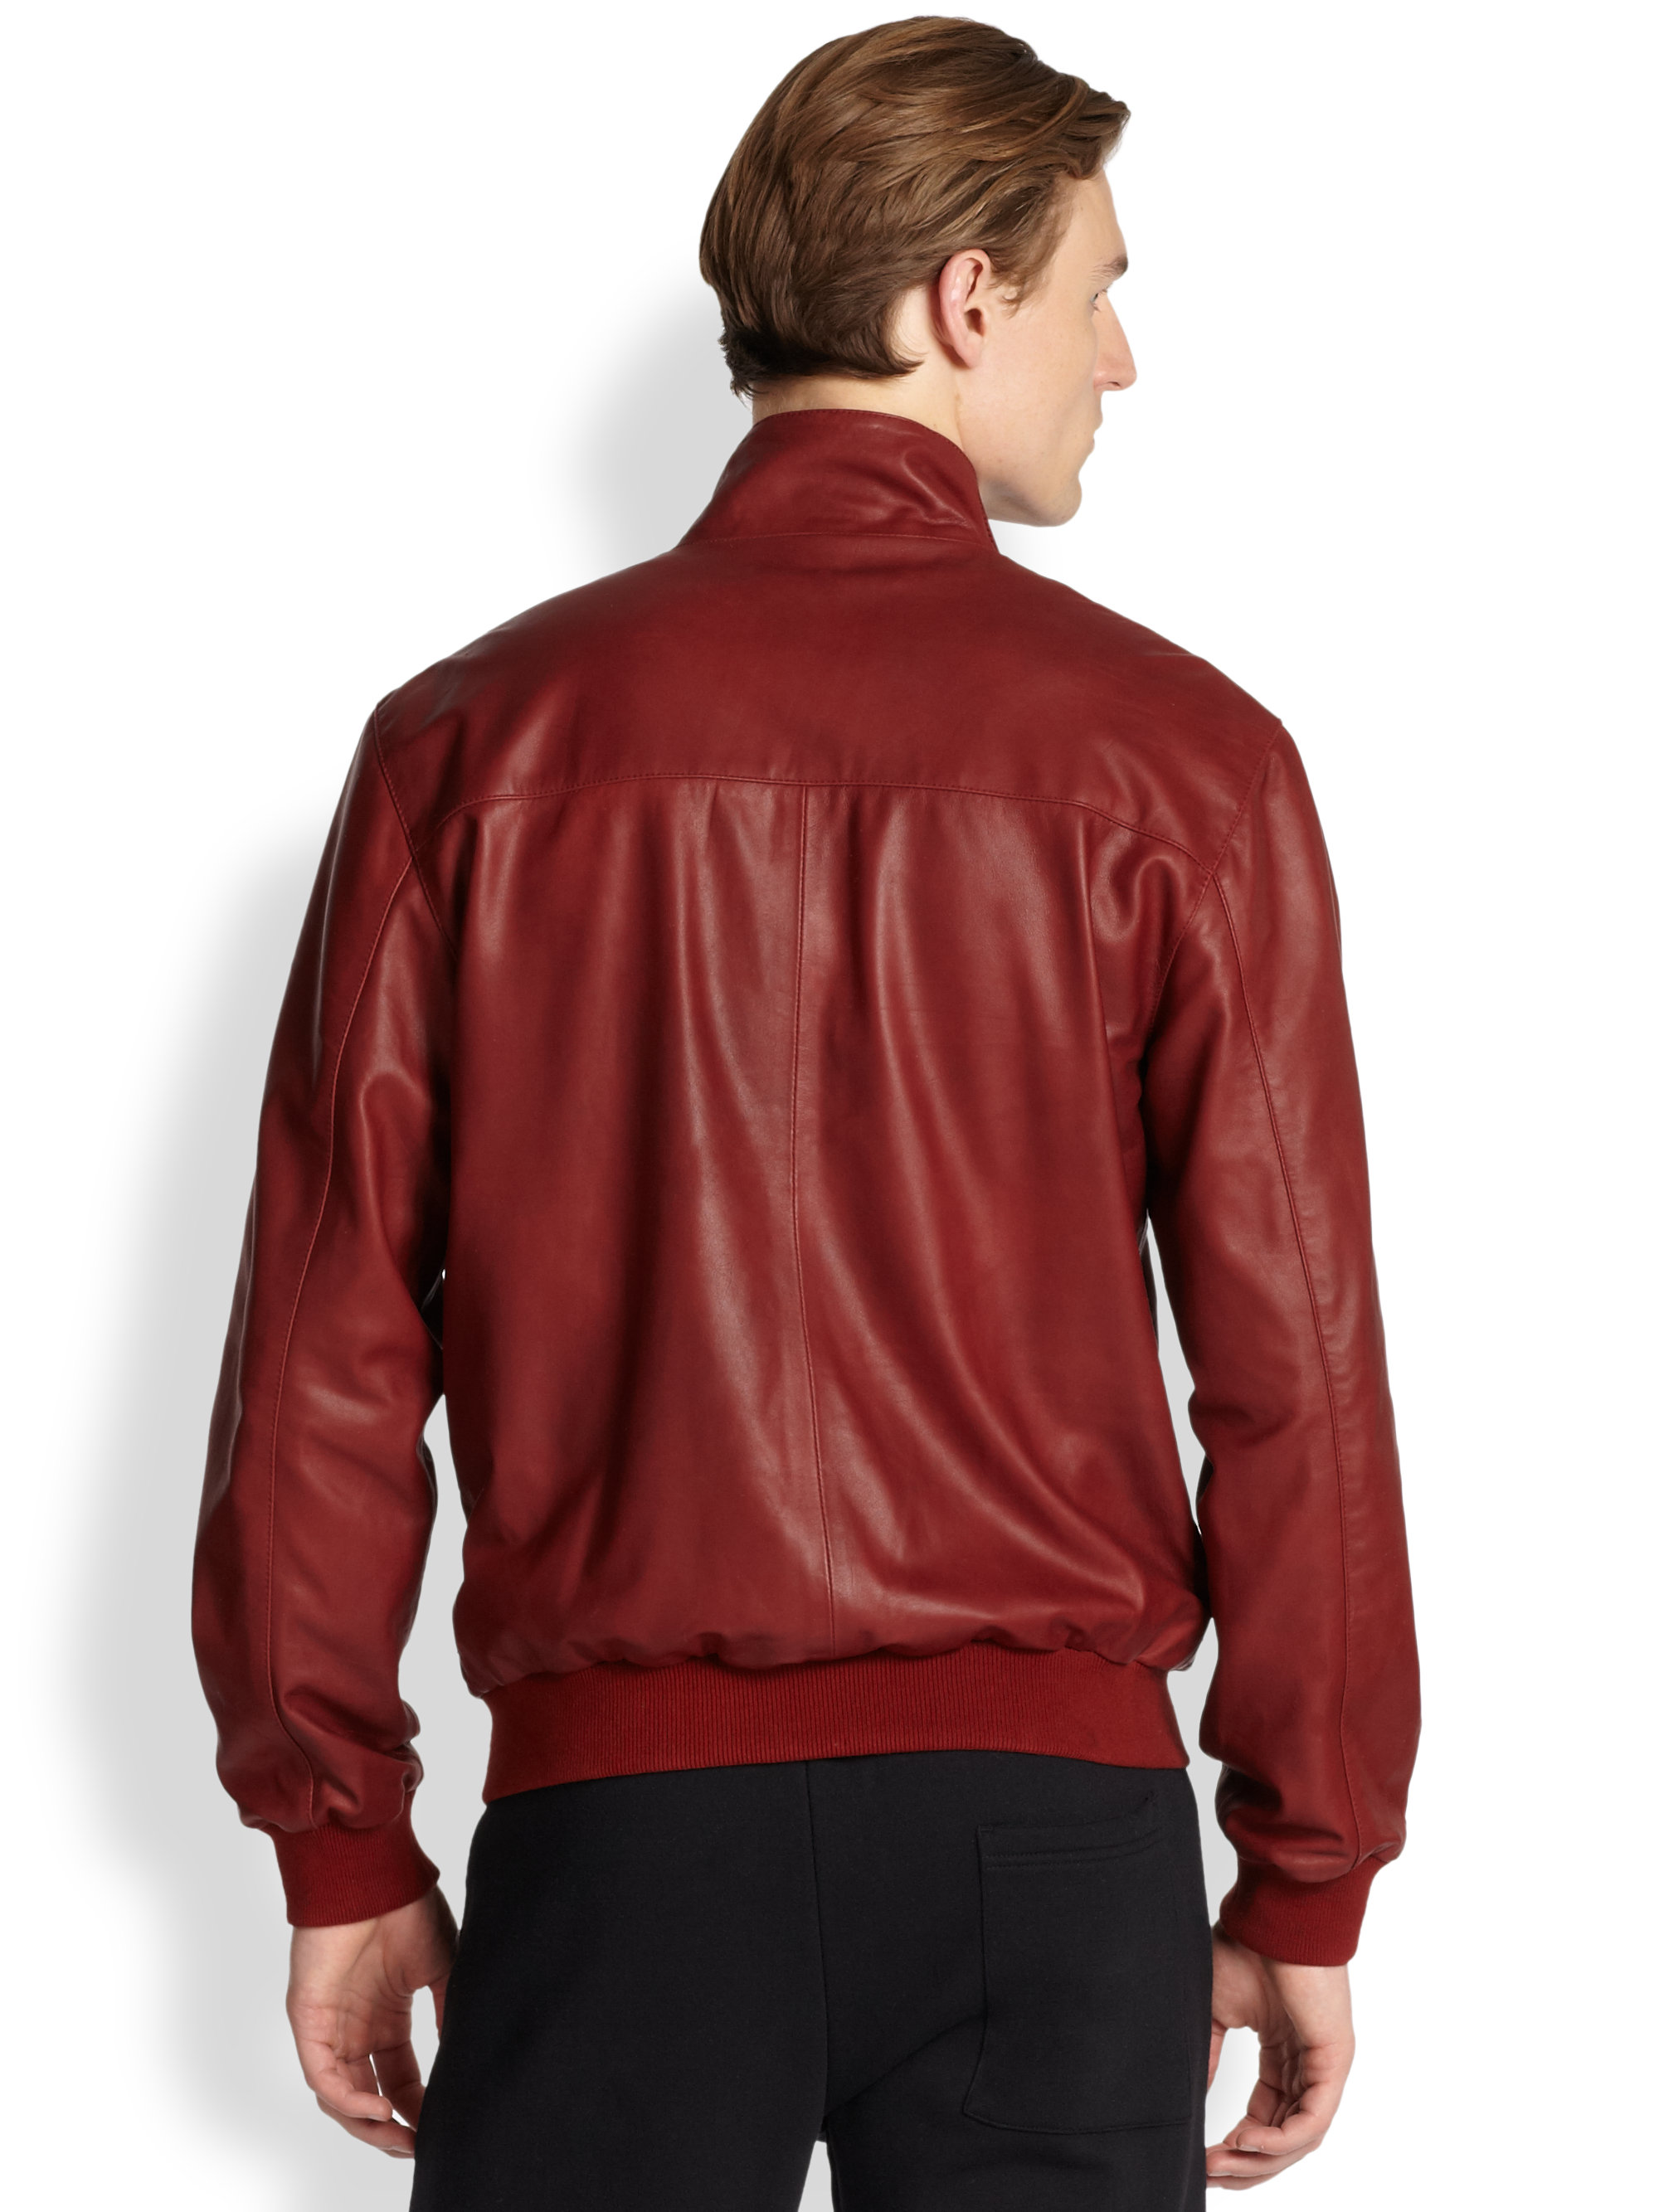 Lyst - Mcq Leather Bomber Jacket in Red for Men